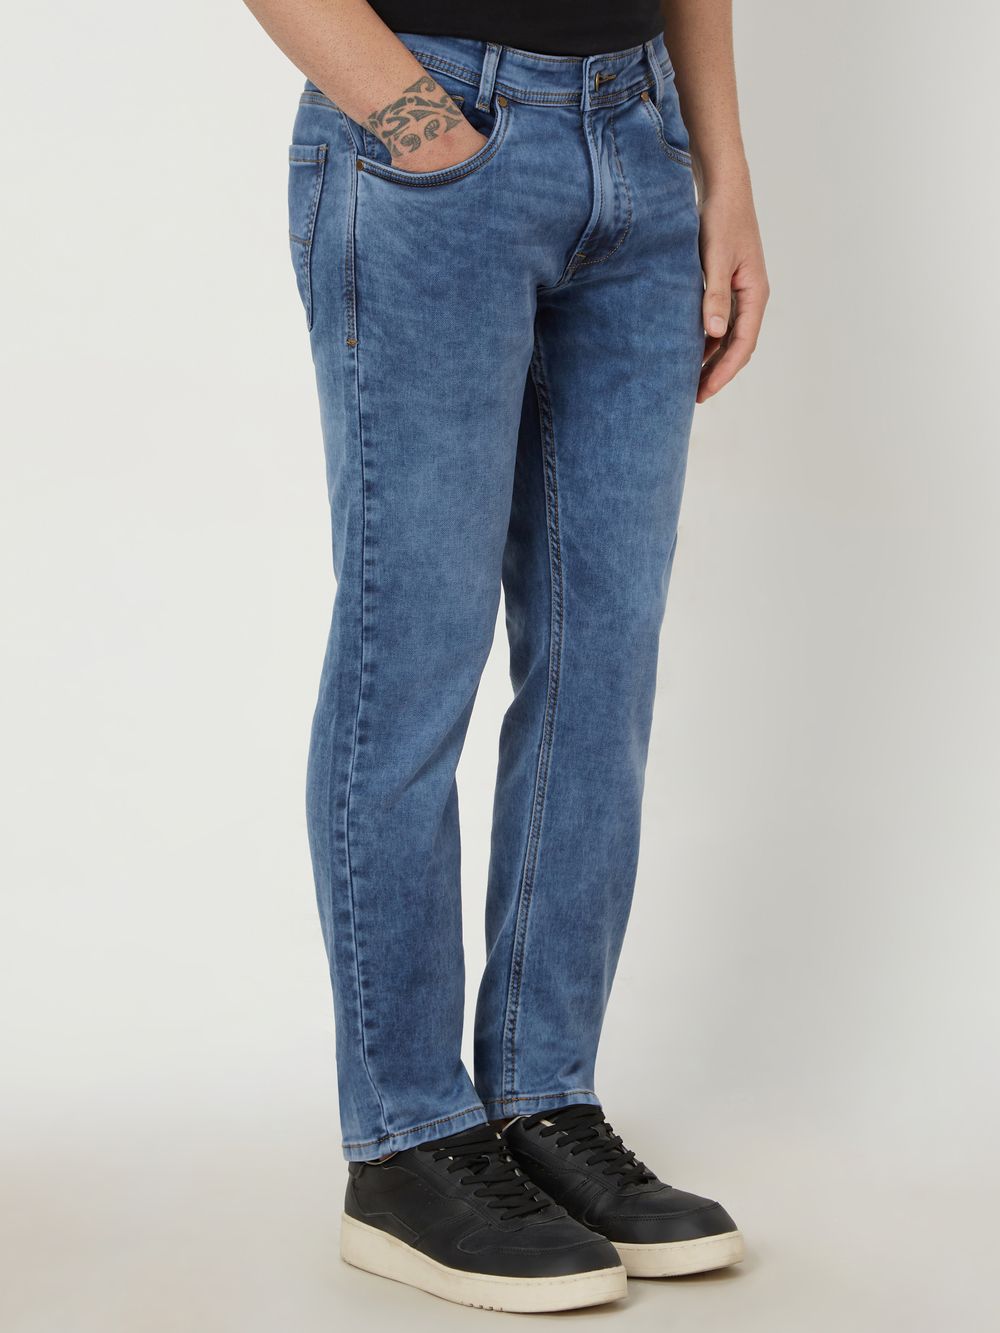 Blue Black Straight Fit Denim Deluxe Stretch Jeans